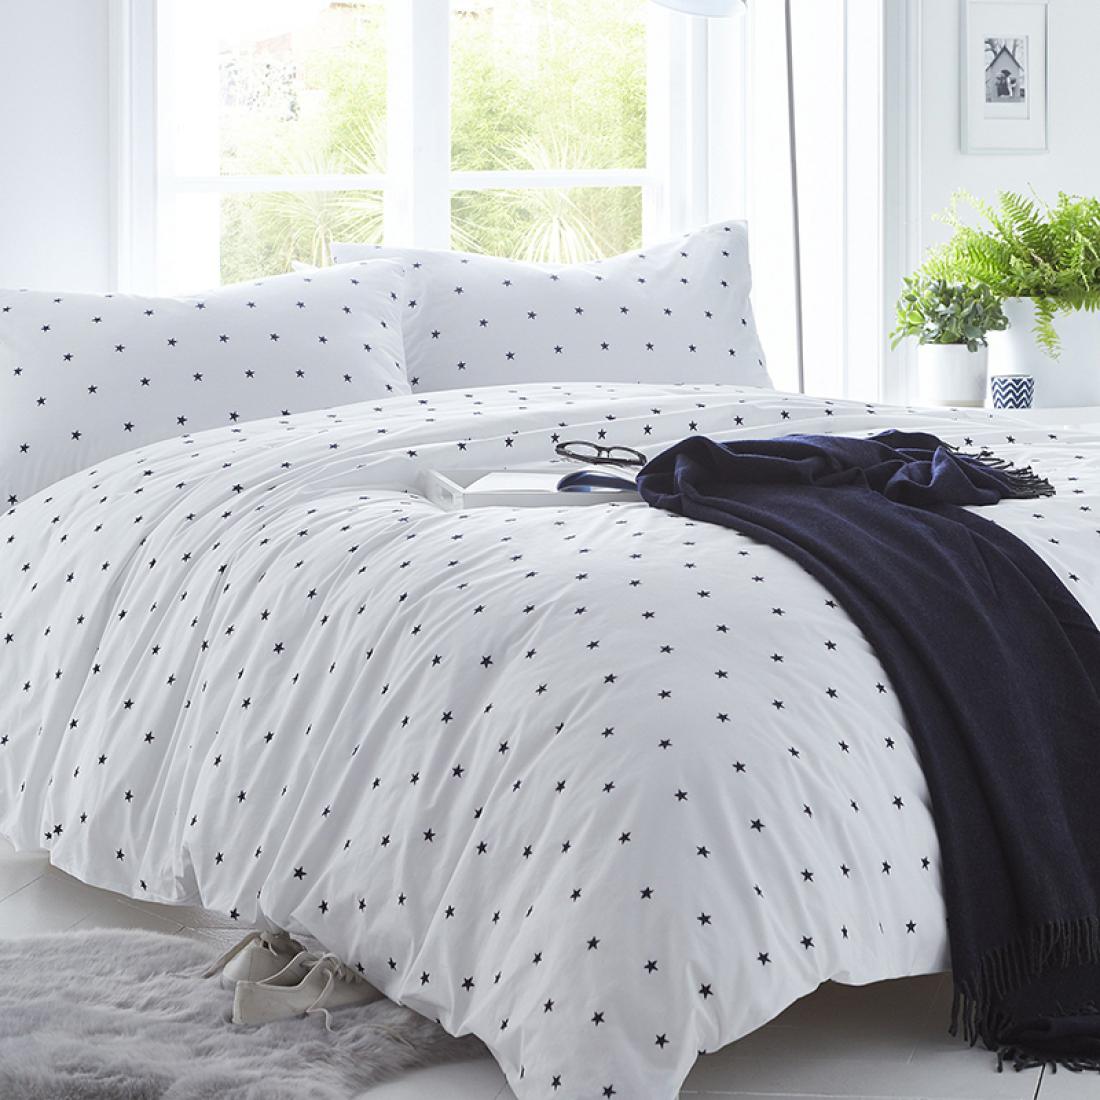 Organic Navy Star Cotton Childrens, Navy And White King Size Duvet Covers